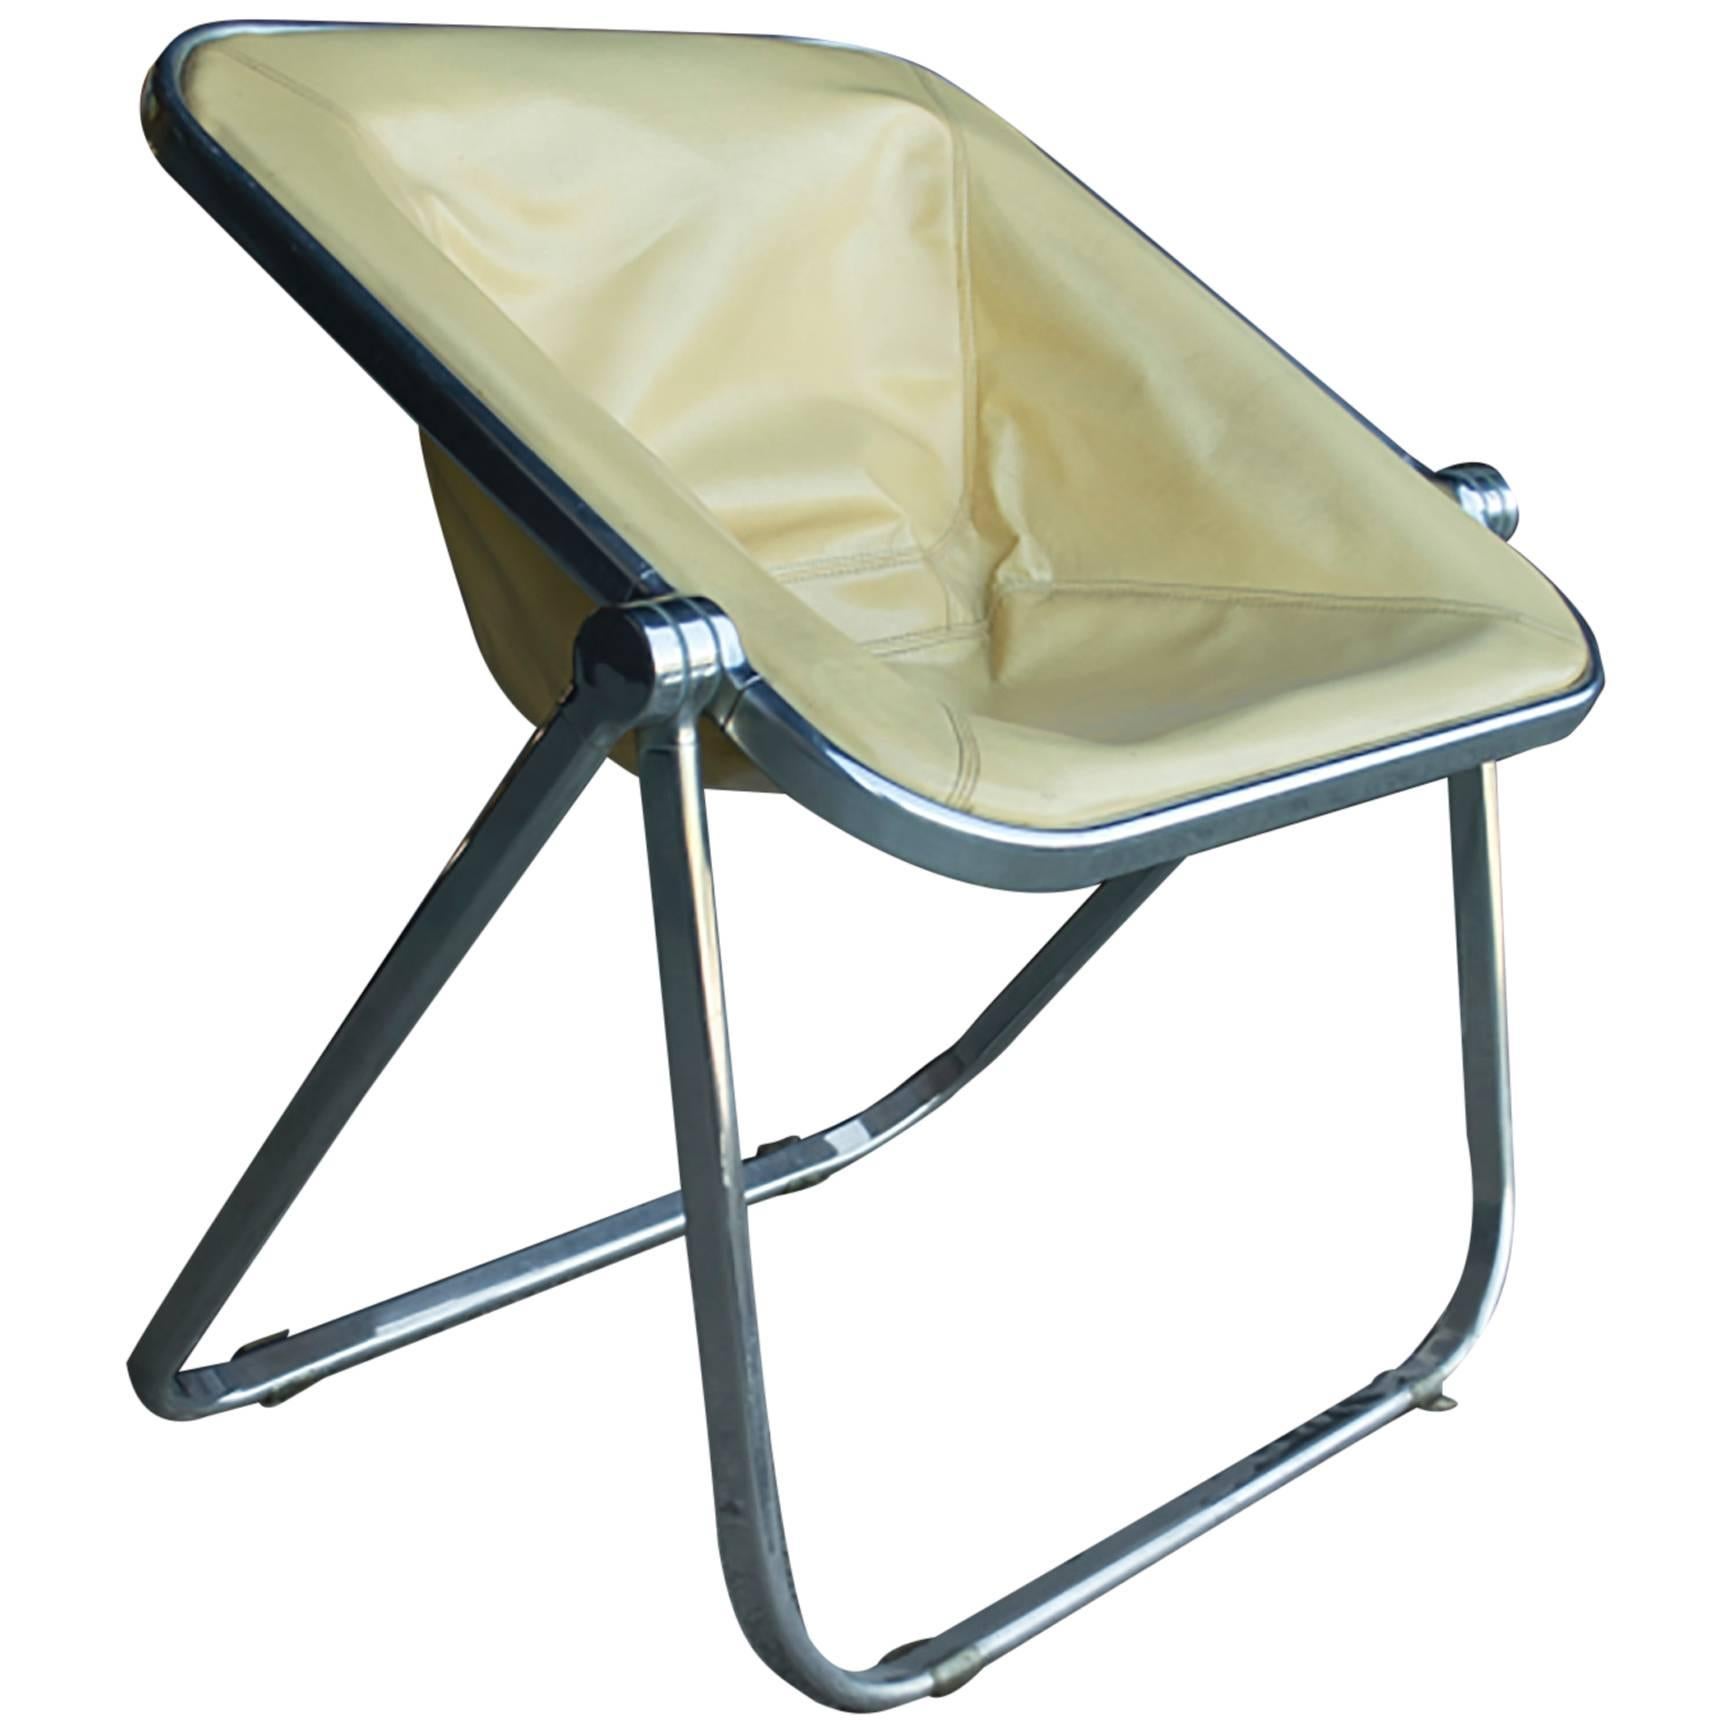 Leather Plona Folding Chair For Sale